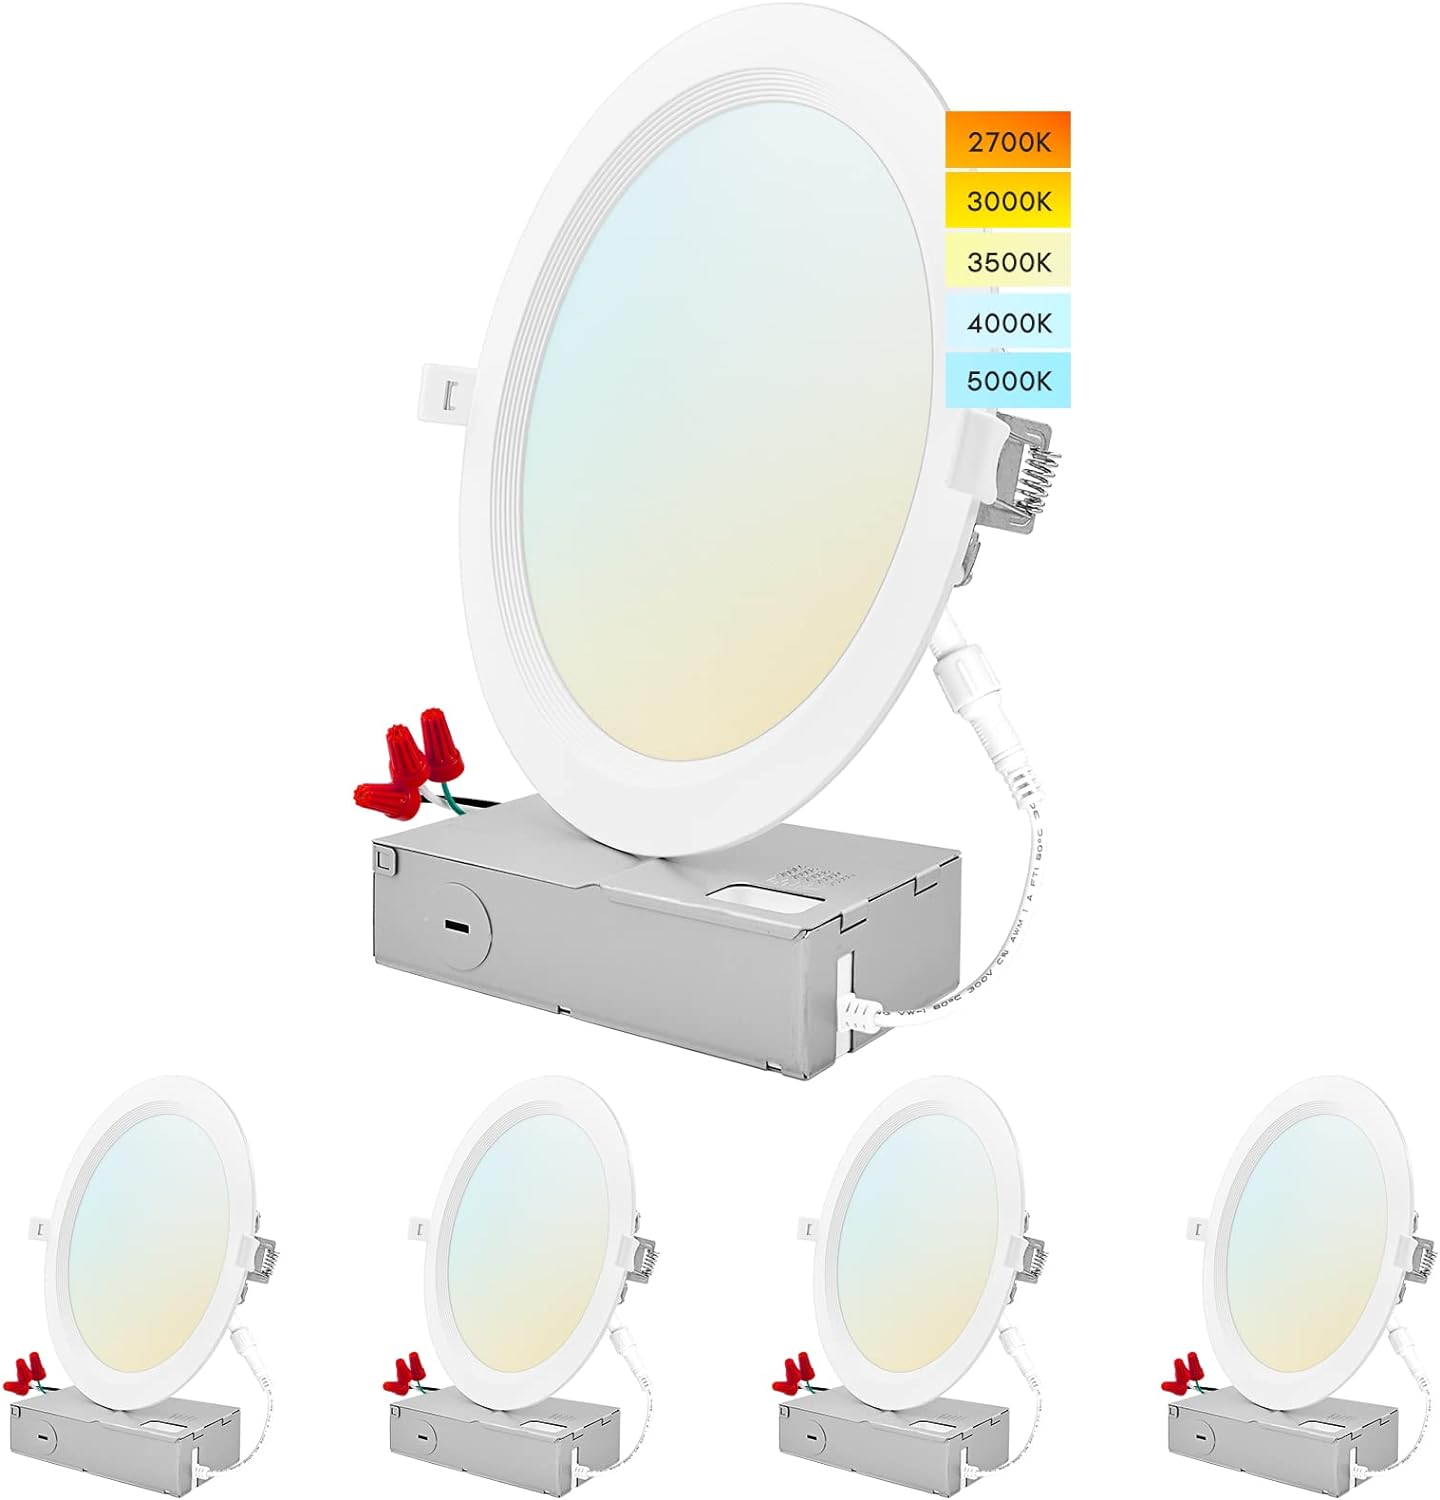 LUXRITE 8 Inch Ultra Thin LED Recessed Lighting, 23W, 5 Color Selectable 2700K | 3000K | 3500K | 4000K | 5000K, CRI 90, 1800 Lumens, Dimmable LED Wafer Lights, Wet Rated, Baffle Trim (4 Pack)